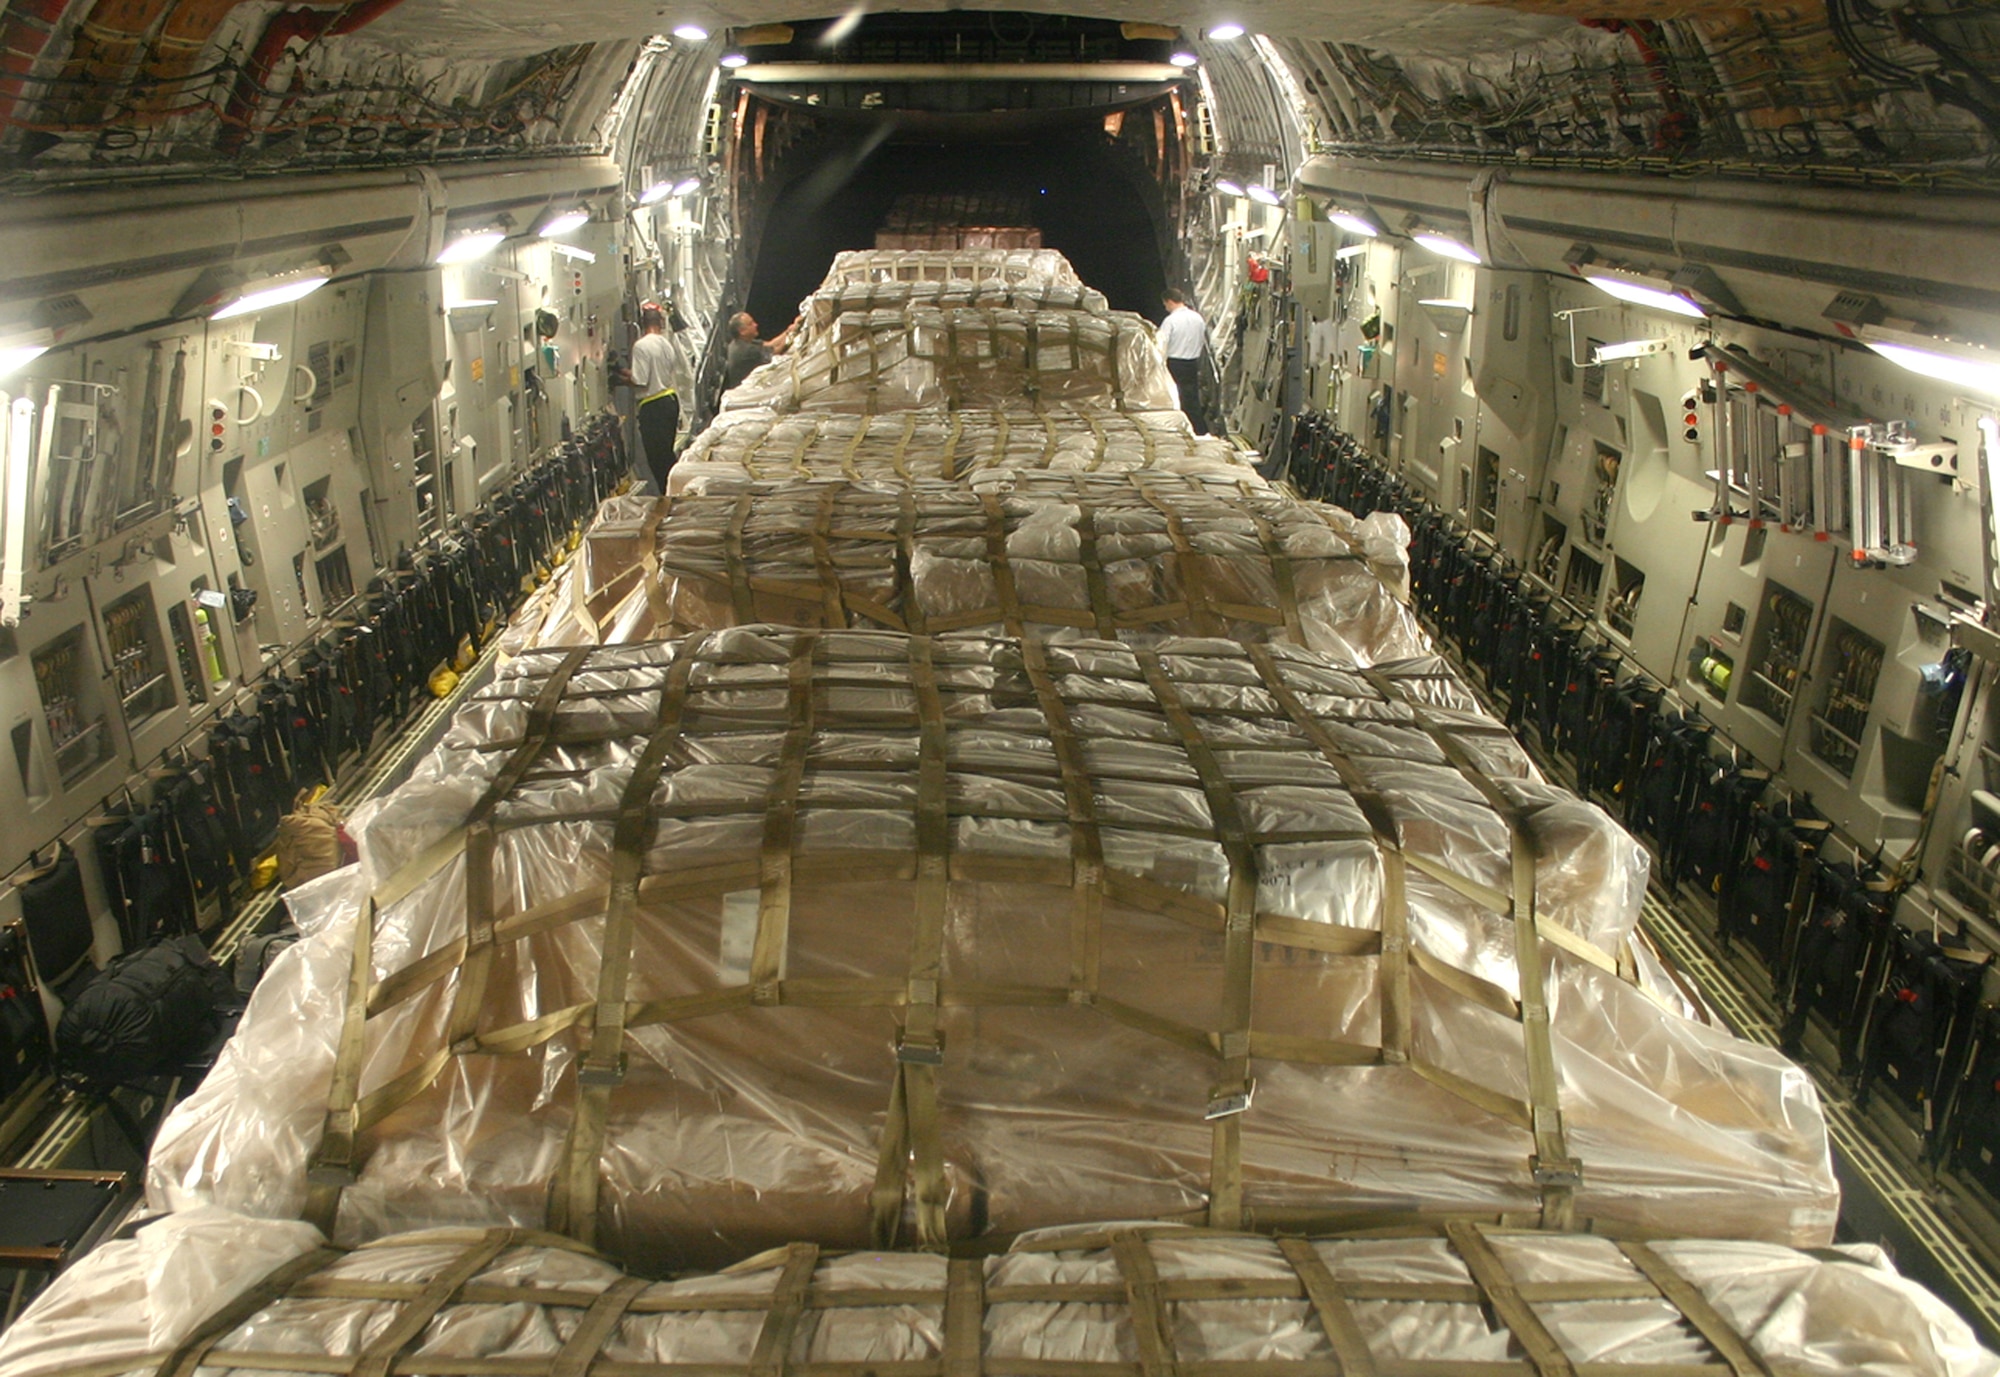 Pallets of personal protective kits sit ready for delivery aboard a C-17 Globemaster III from Charleston Air Force Base, S.C., May 8. The kits are part of a U.S. Agency for International Development shipment to Haiti, Guatemala, Honduras, El Salvador, Nicaragua and Belize to help these nations prepare for a potential outbreak of the H1N1 influenza virus. (U.S. Air Force photo/Raymond Sarracino) 